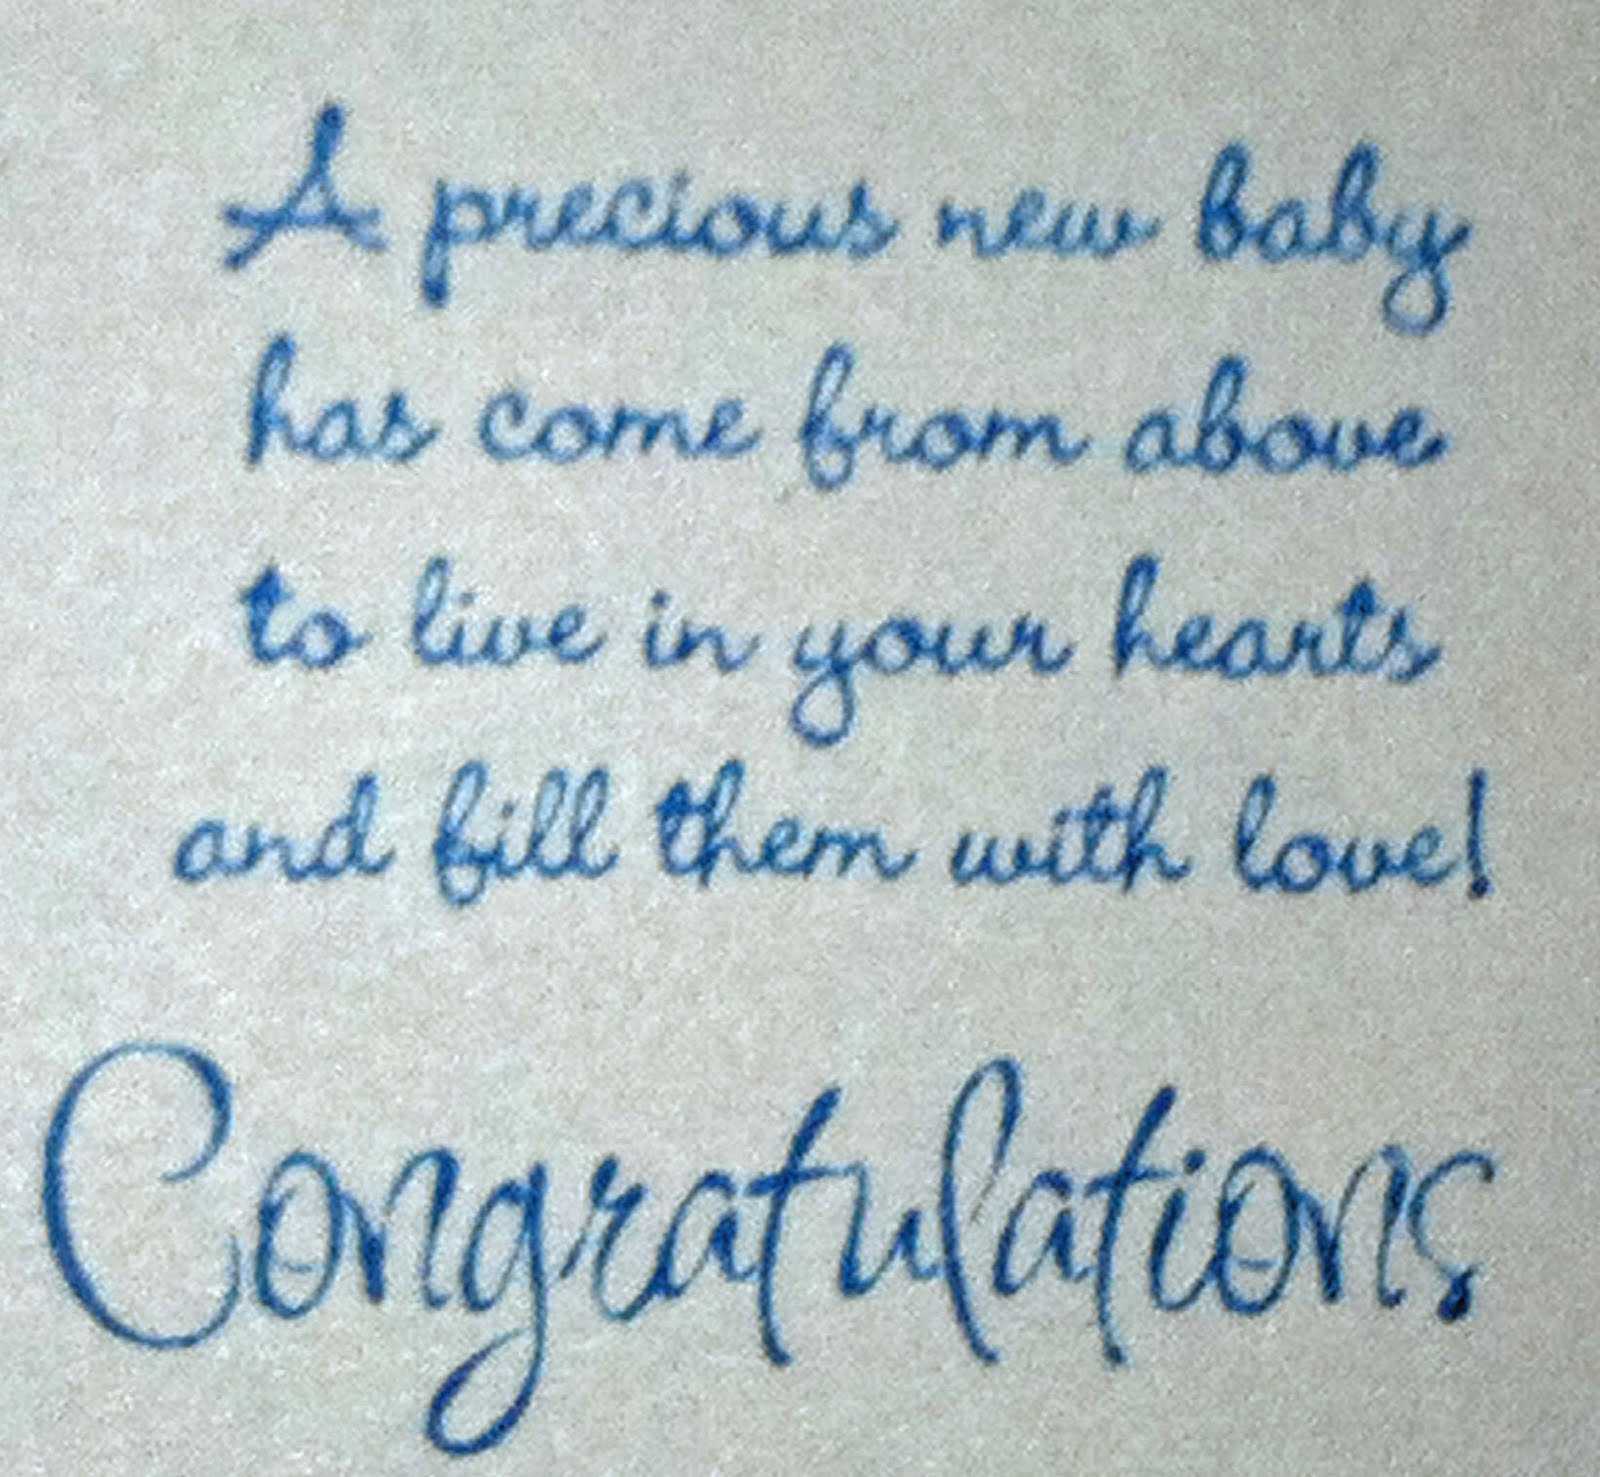 New Baby Congratulations Quotes
 Michelle s MBellishments Happy New Baby